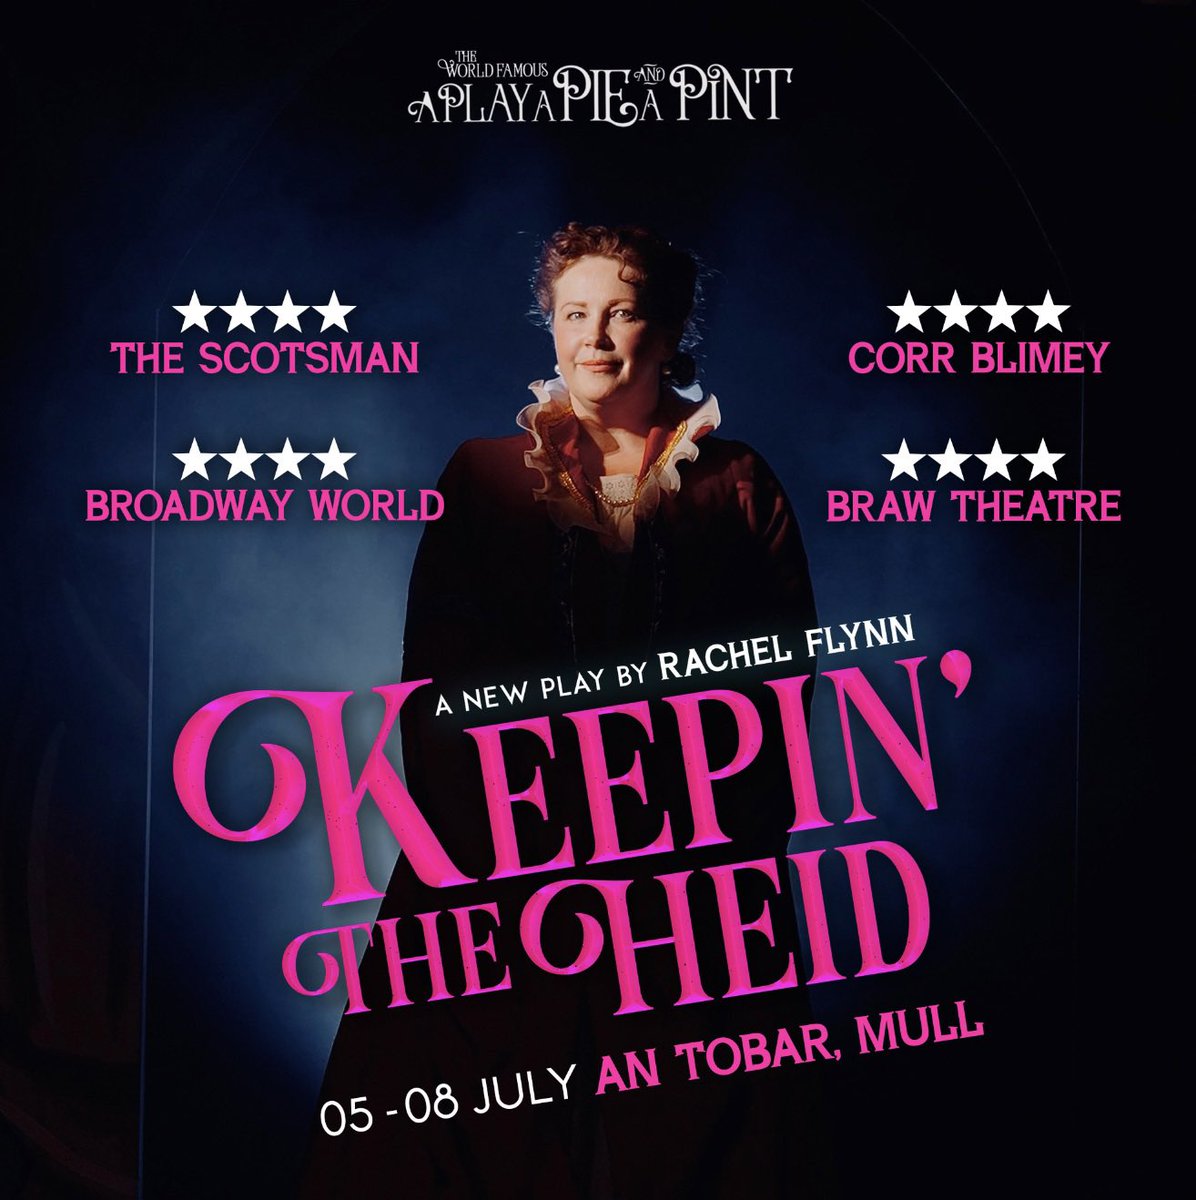 Another ⭐️⭐️⭐️⭐️ from @BrawTheatre as we land in Mull for @ATandMT performances of @PlayPiePint of Keepin’ The Heid with @saldoreid and #FionaWood brawtheatre.com/review-keepin-…